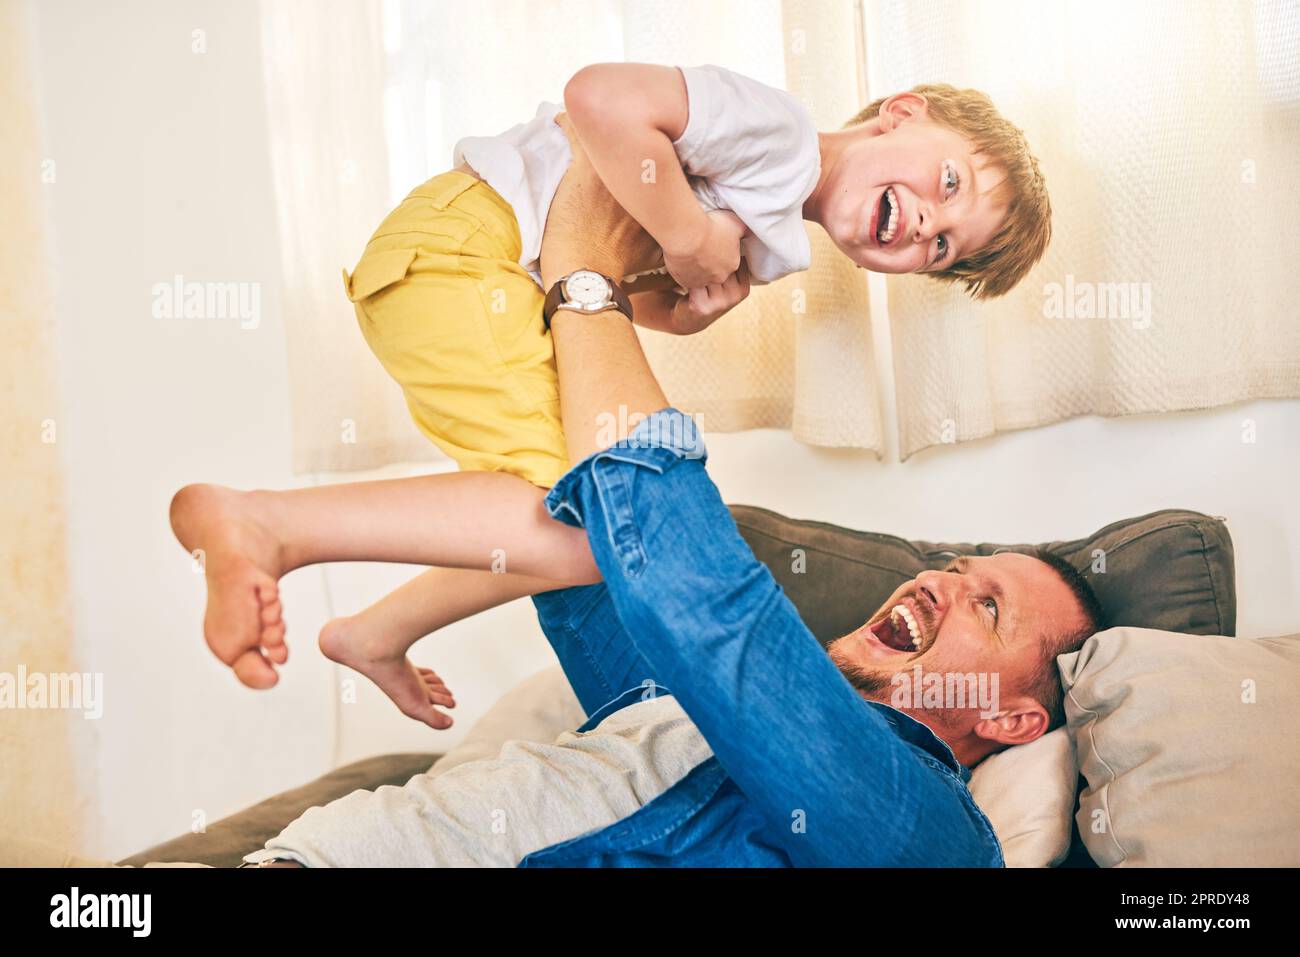 More than playtime, its bonding time. a happy little boy having fun with his father at home. Stock Photo